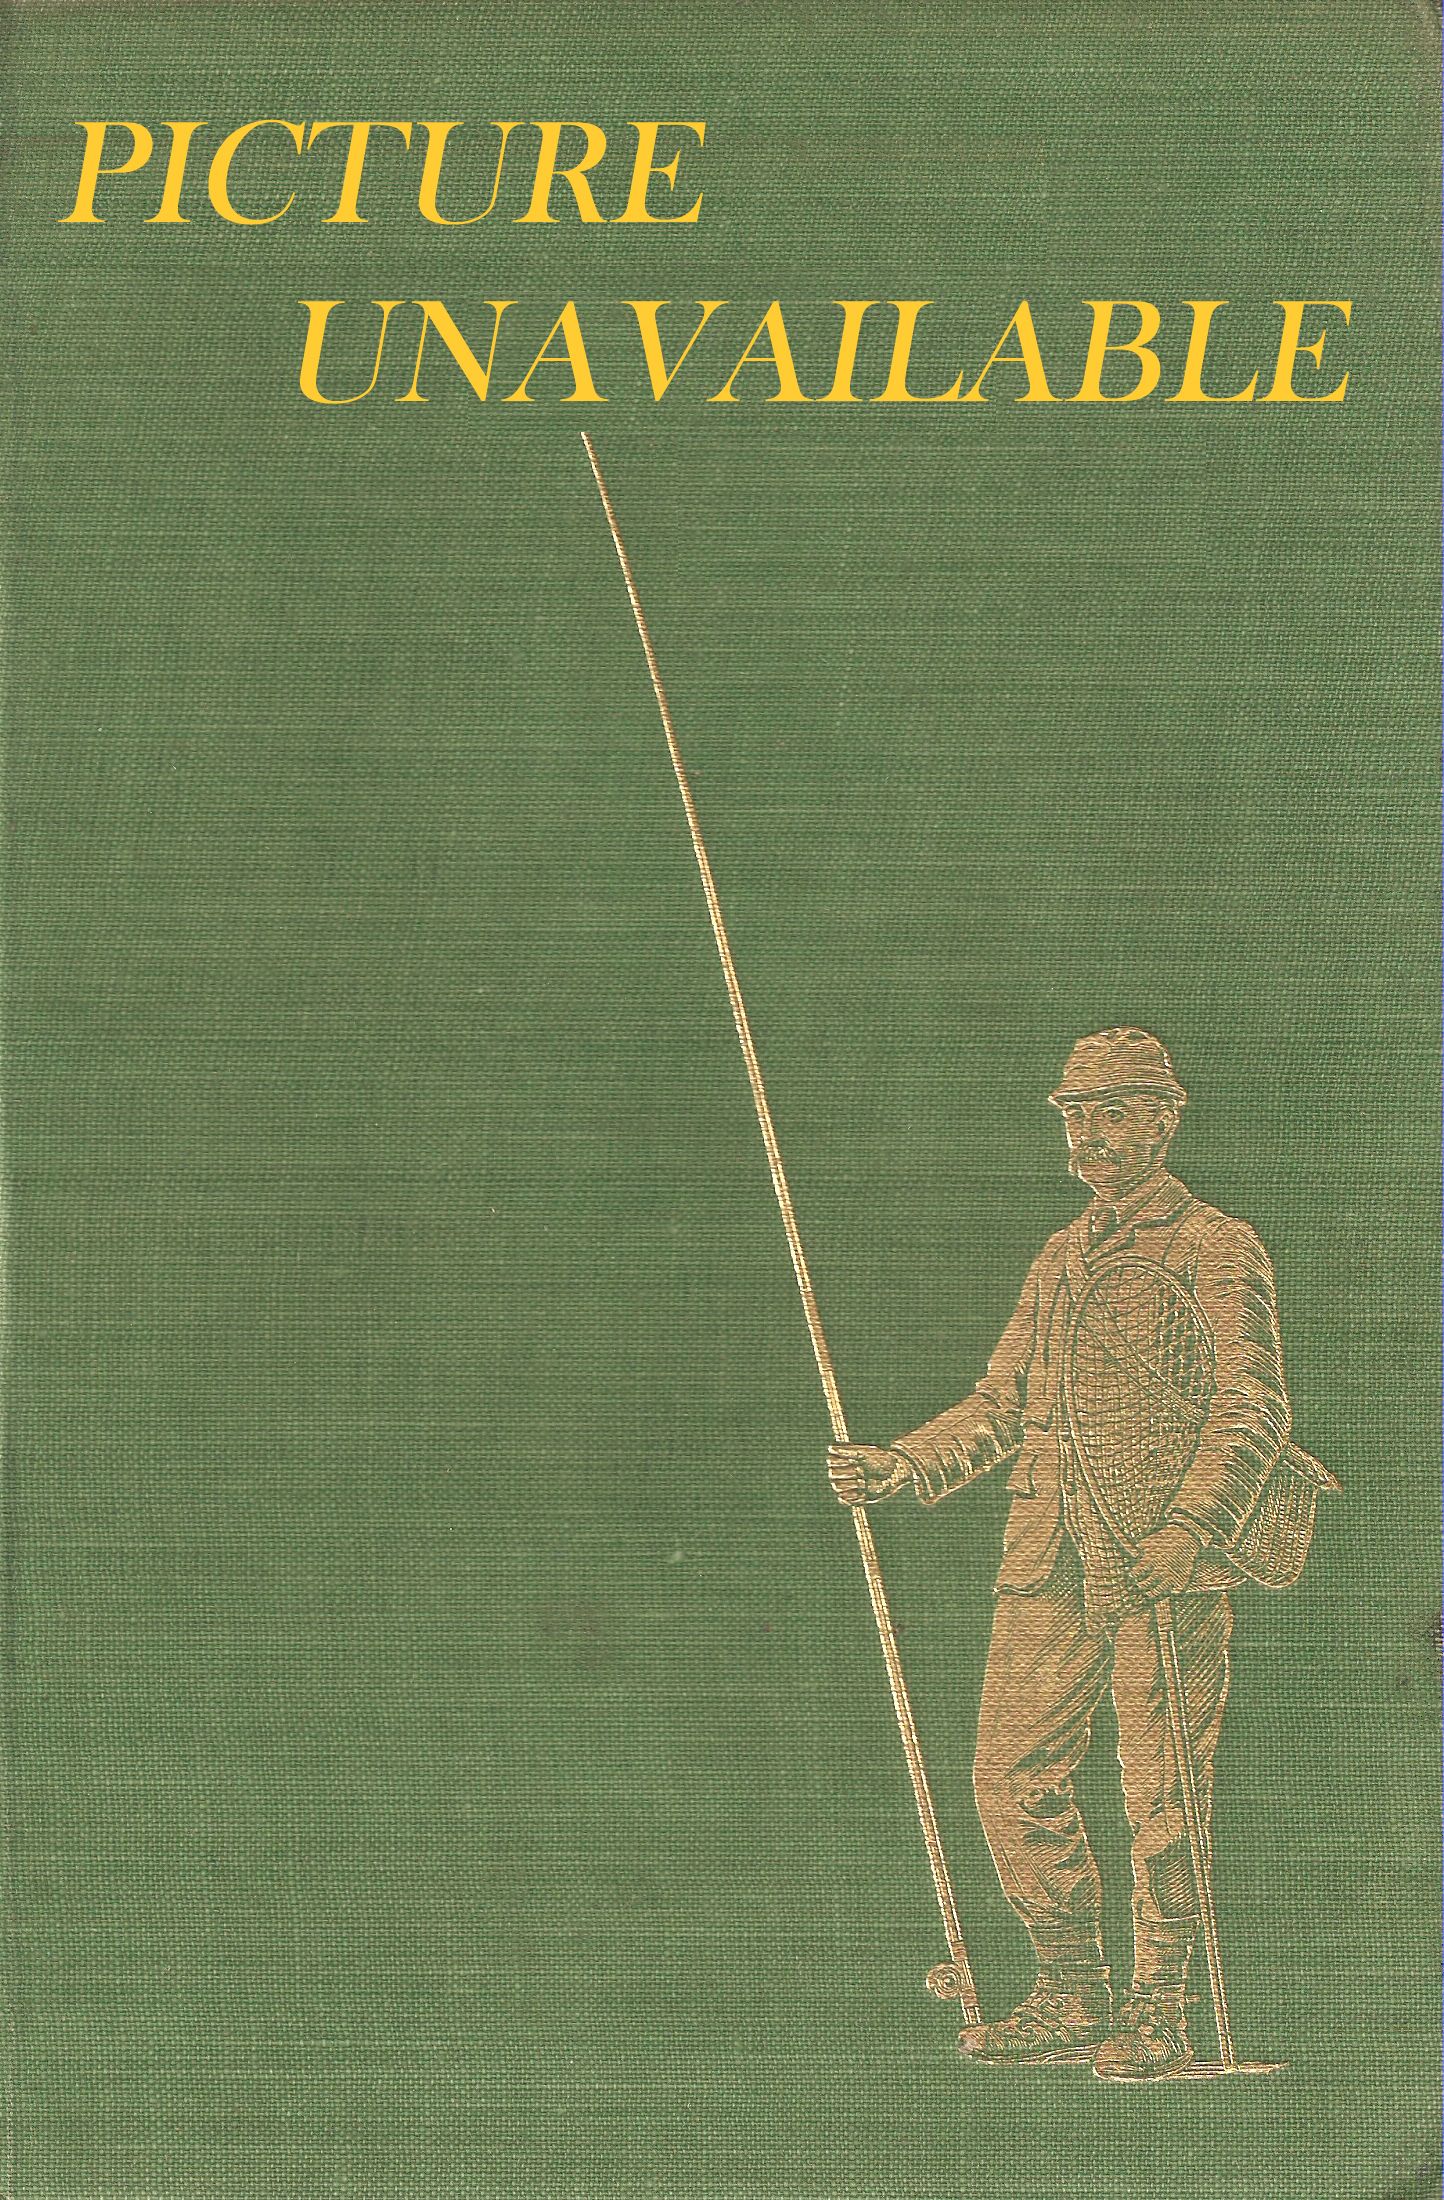 CLASSIC RODS AND RODMAKERS. By Martin J. Keane. Reprint.